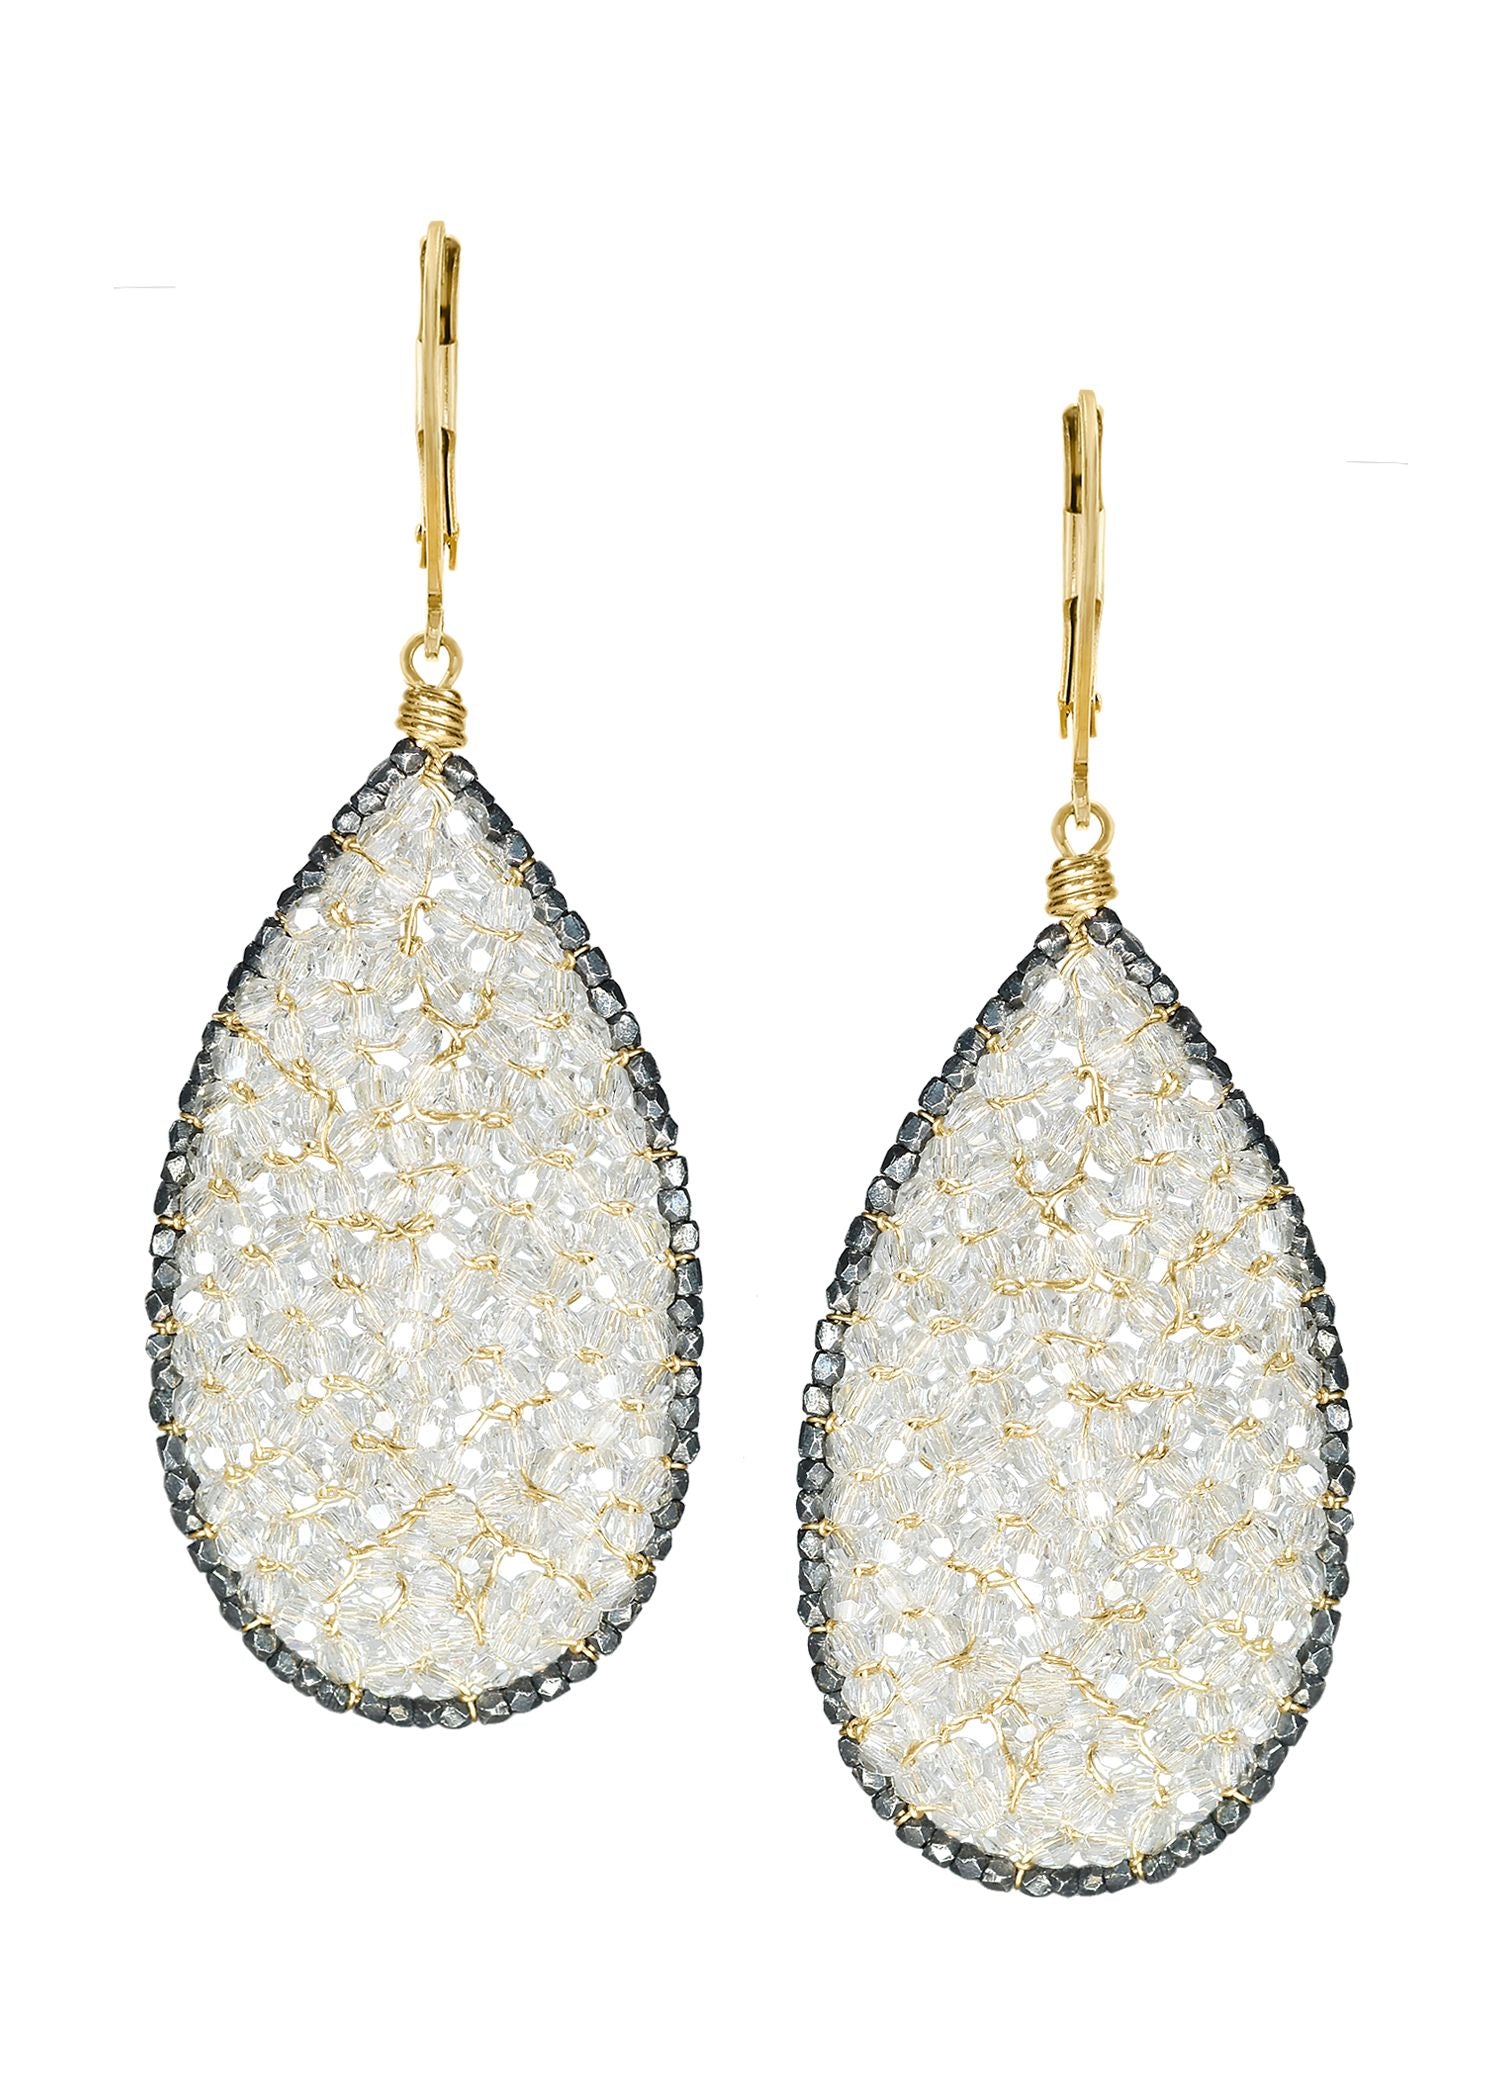 Crystal 14k gold fill Blackened sterling silver Mixed metal Earrings measure 2-3/16" in length (including the levers) and 3/4" in width Handmade in our Los Angeles studio